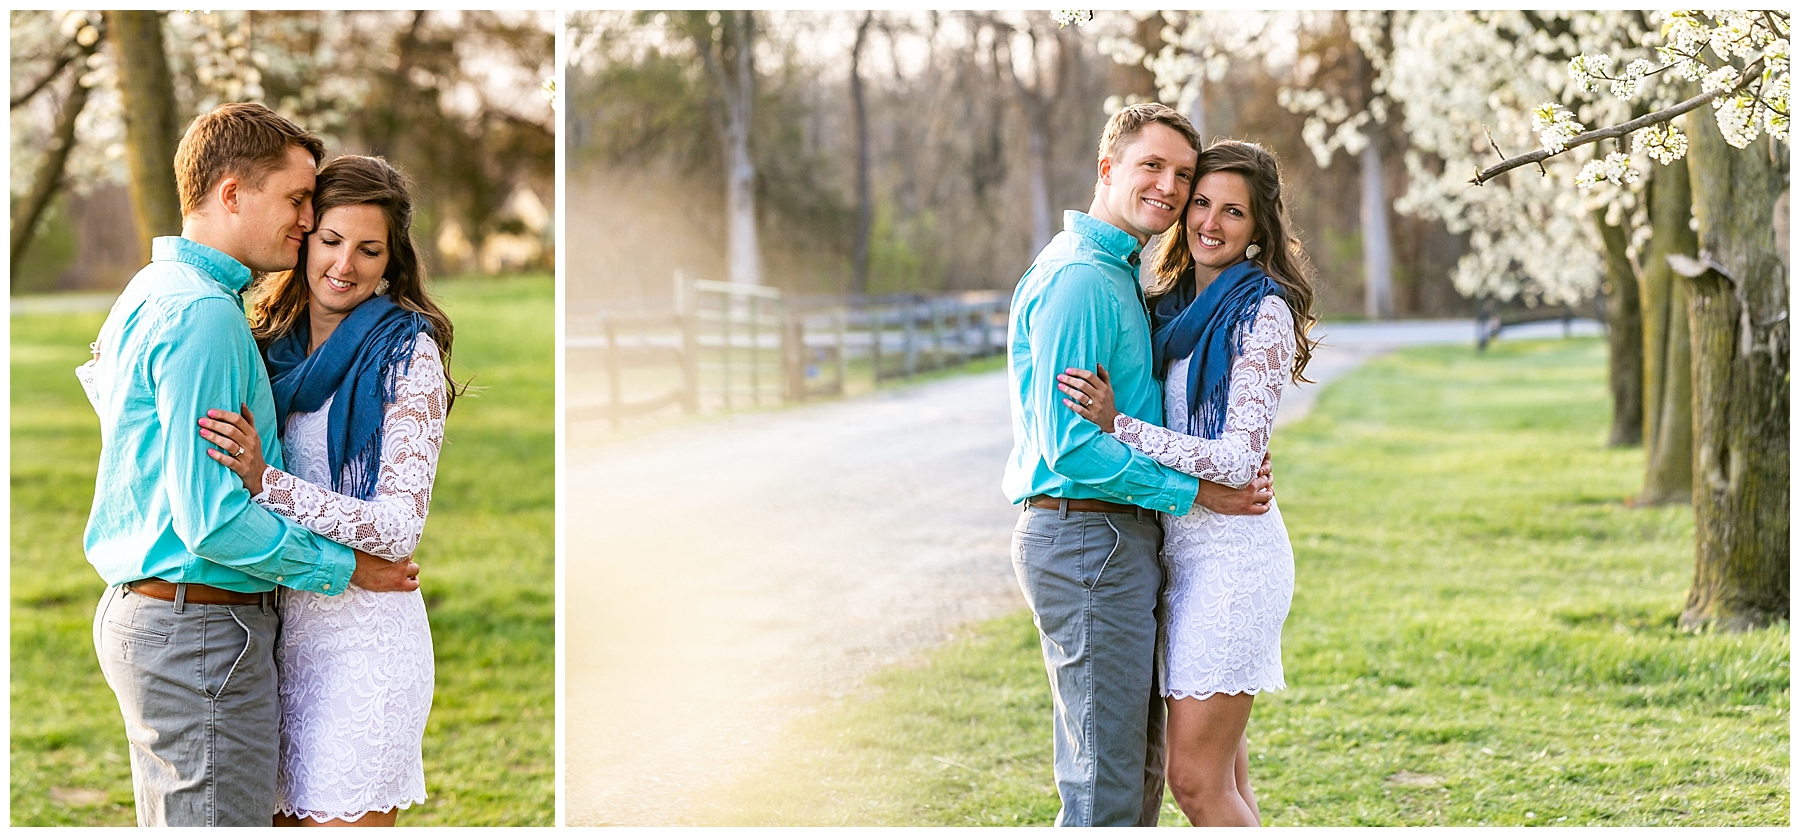 Chelsea Phil Private Estate Engagement Living Radiant Photography photos color_0025.jpg